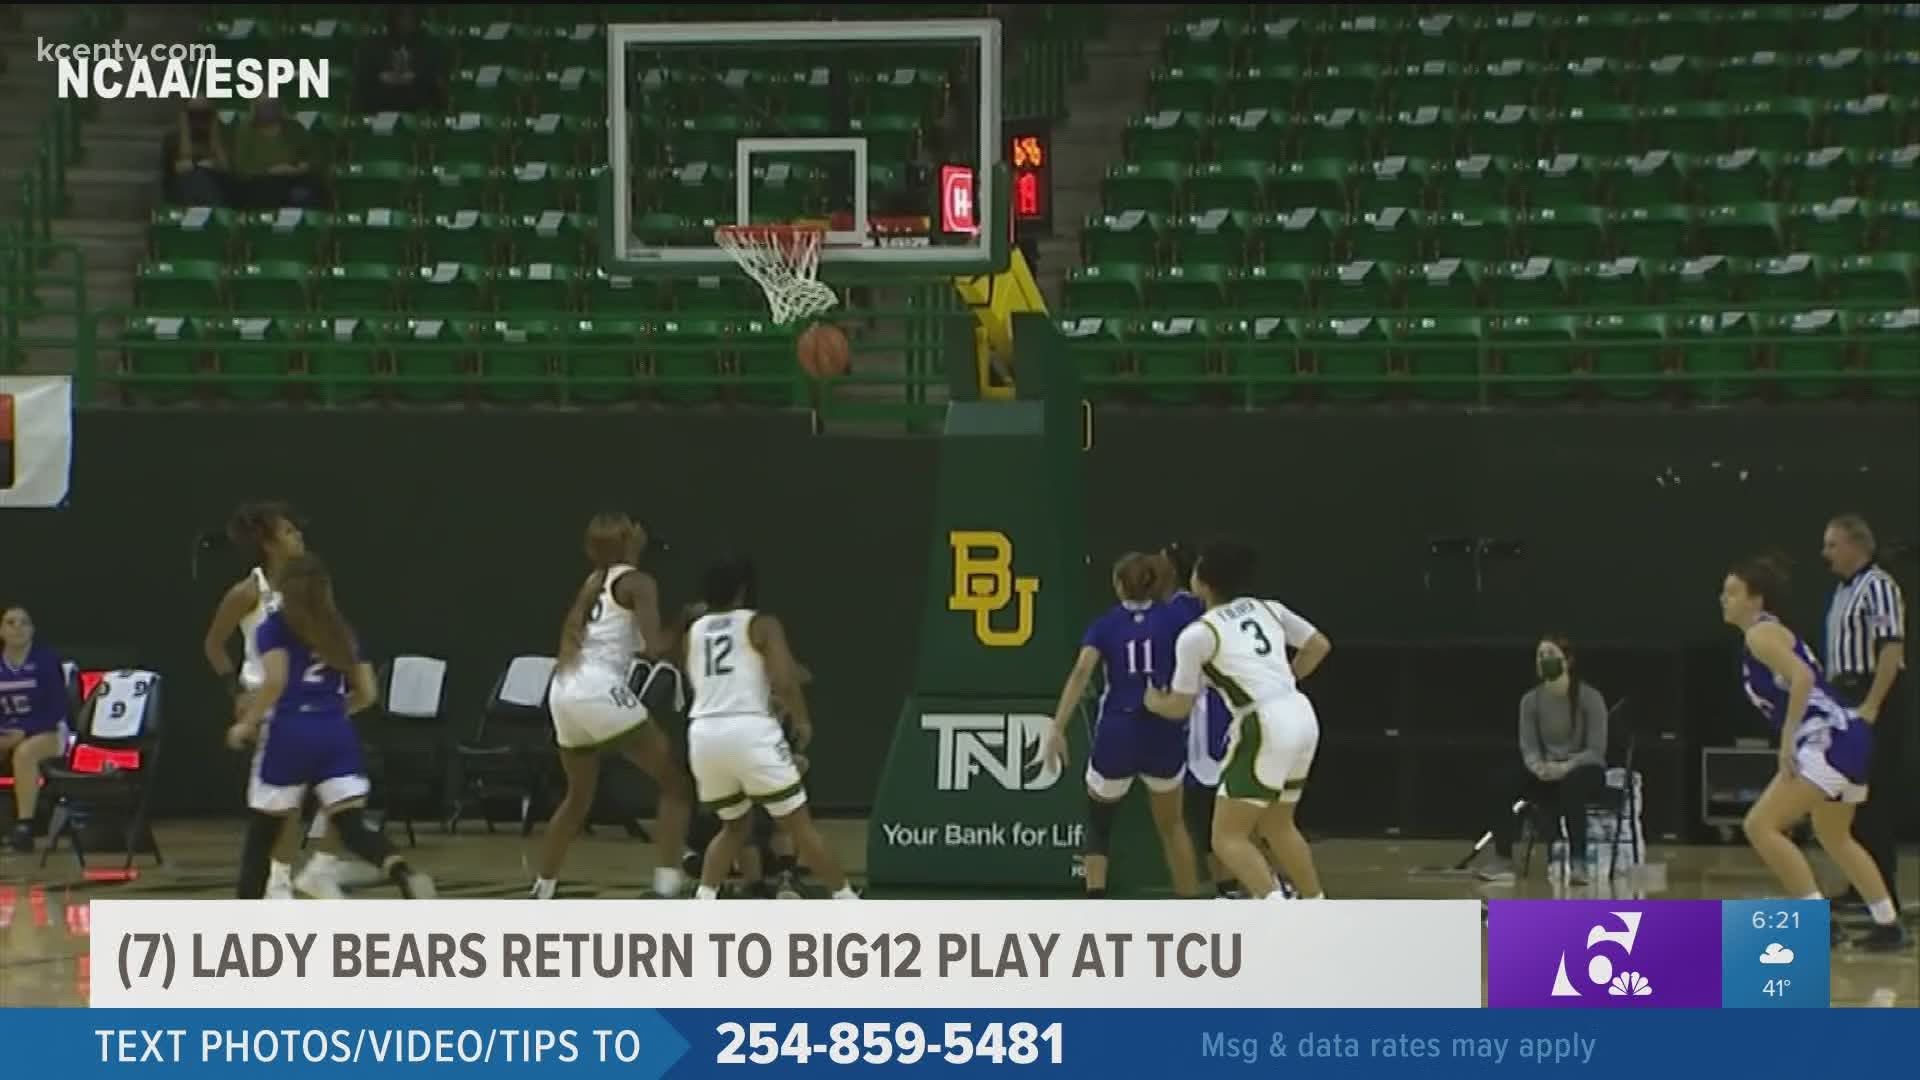 The Lady Bears are kicking off 2021 at TCU against the Horned Frogs - a team they have dominated for nearly 30 years.